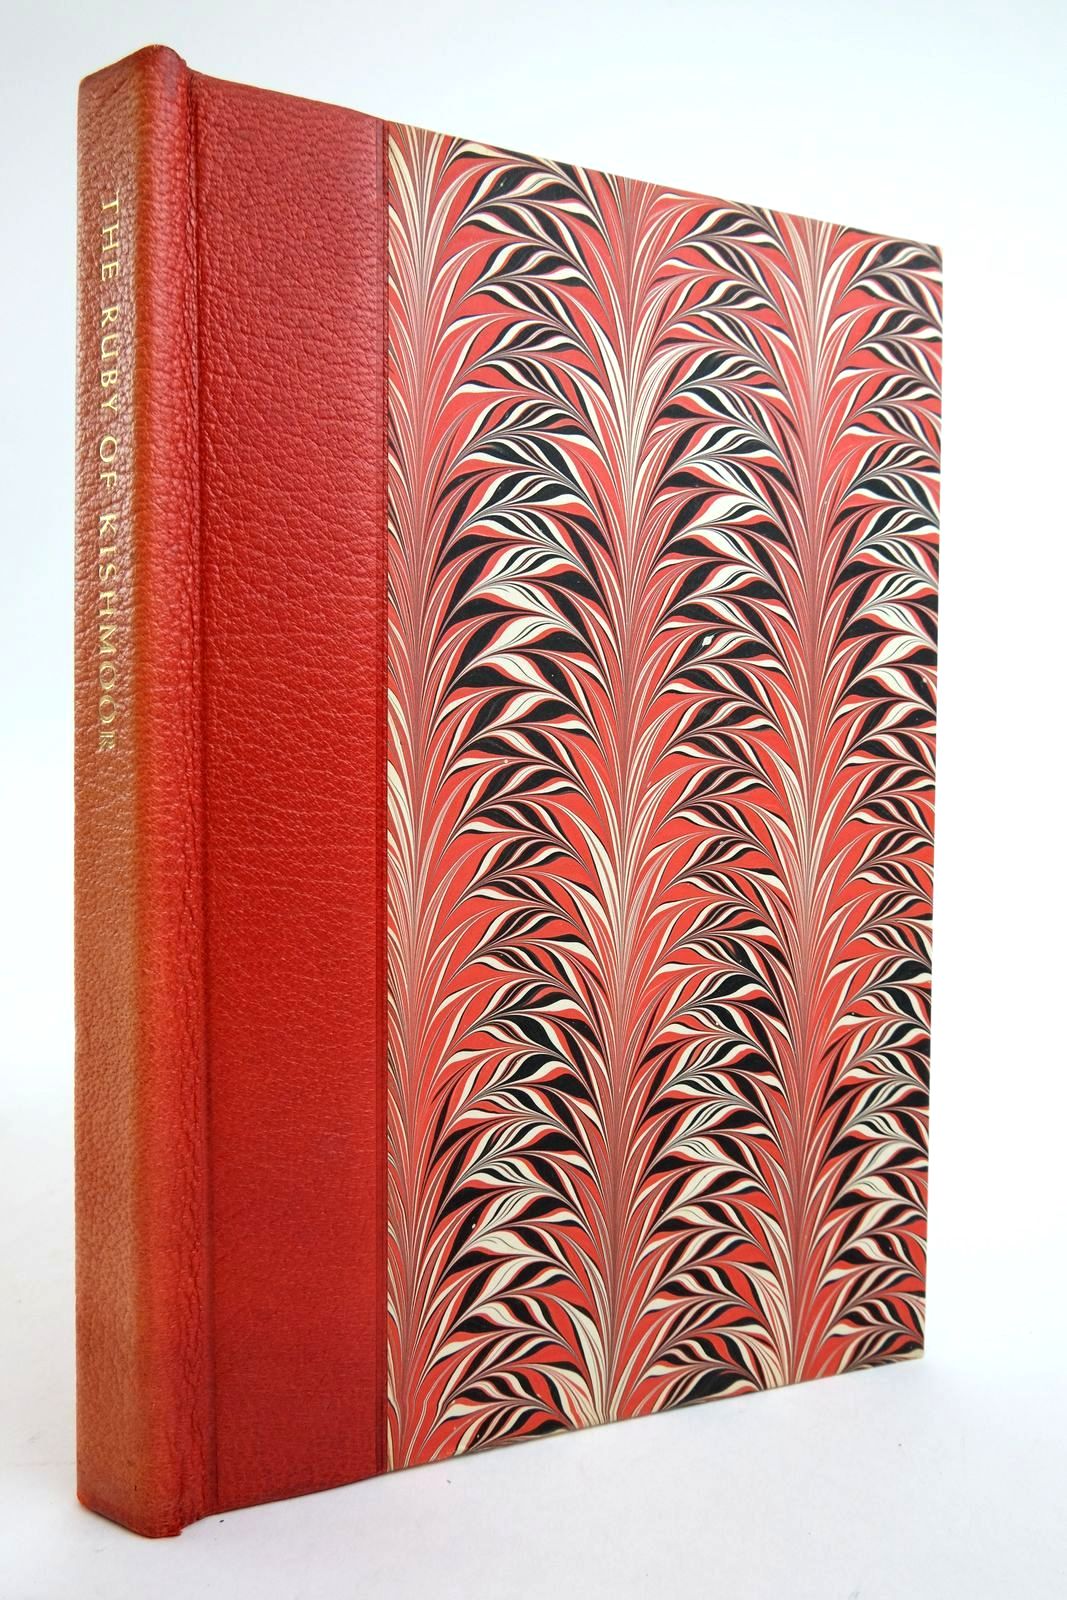 Photo of THE RUBY OF KISHMOOR written by Pyle, Howard illustrated by Pyle, Howard published by C.F. Braun &amp; Co. (STOCK CODE: 2135904)  for sale by Stella & Rose's Books